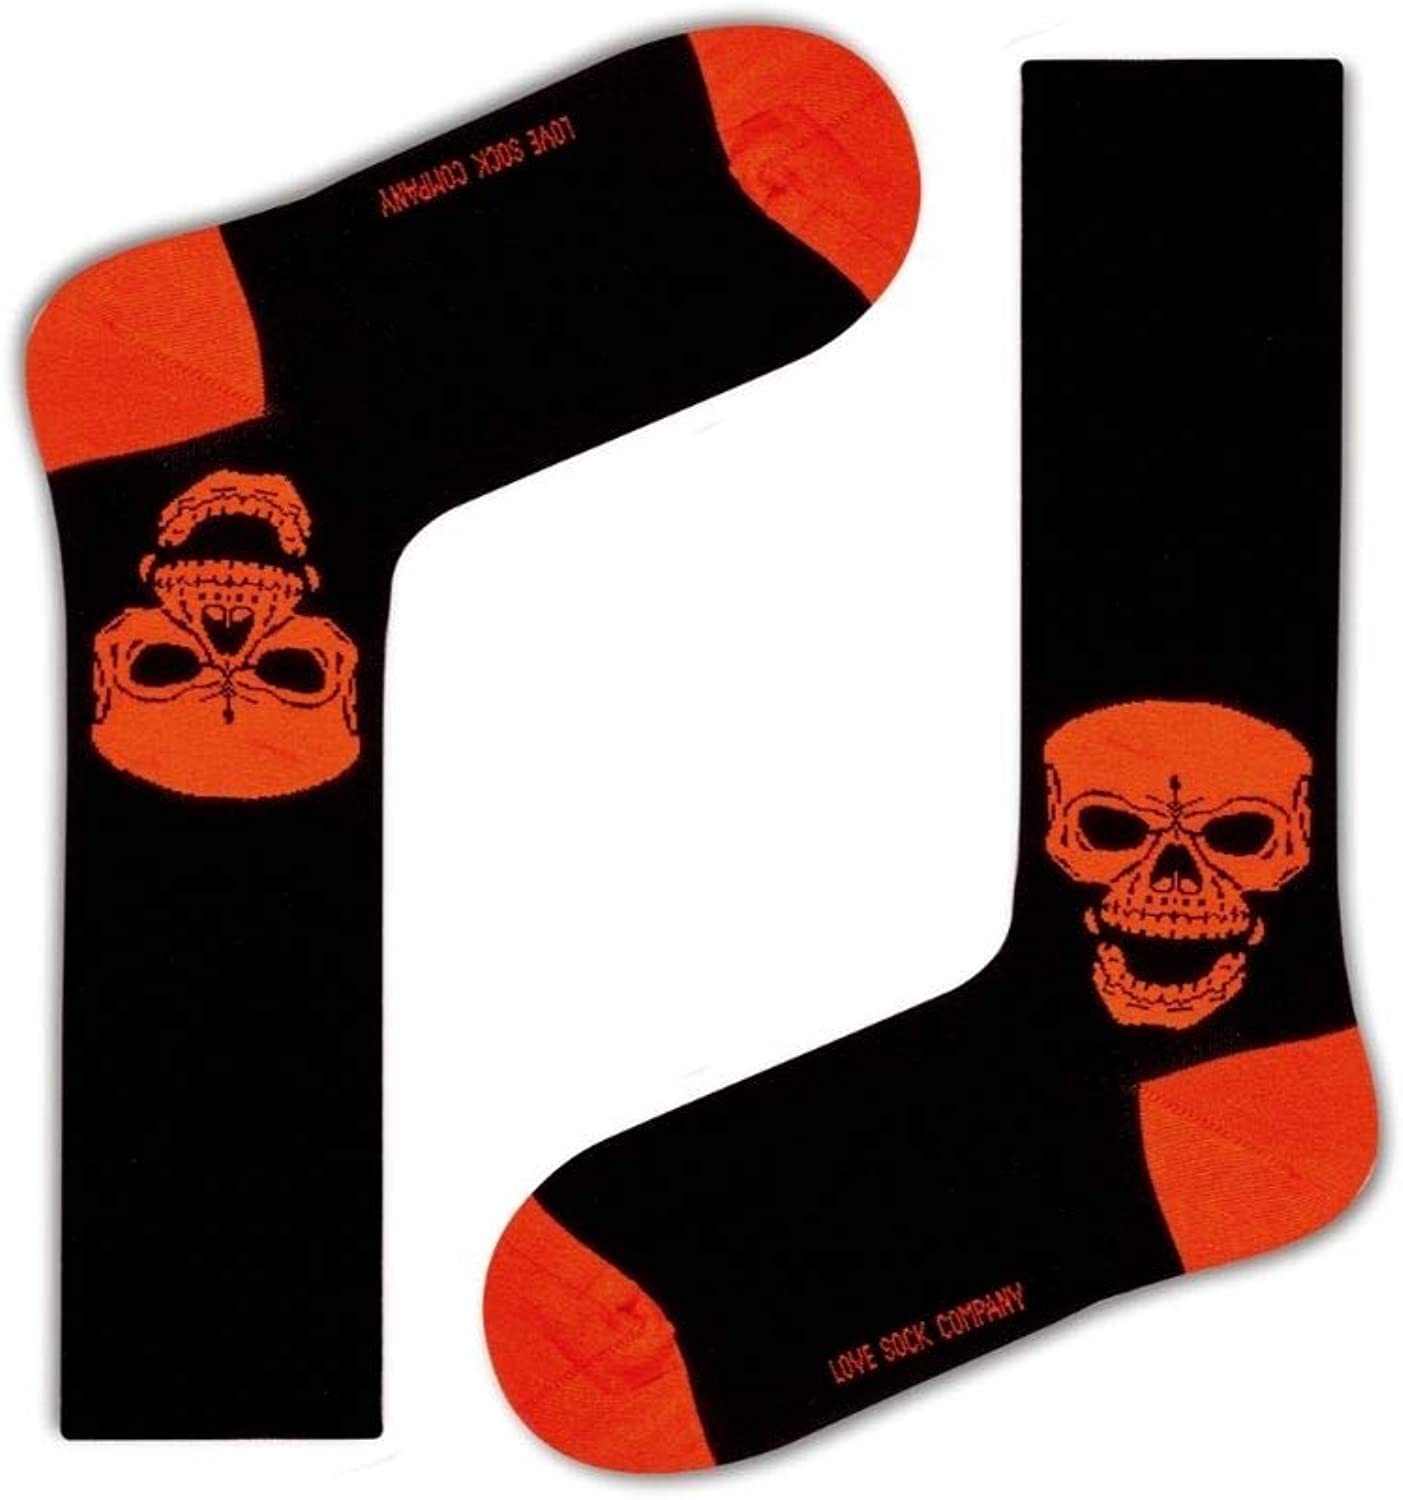 Men’s organic cotton socks with orange Skull design. Seamless toes and highly breathable Motorcycle socks